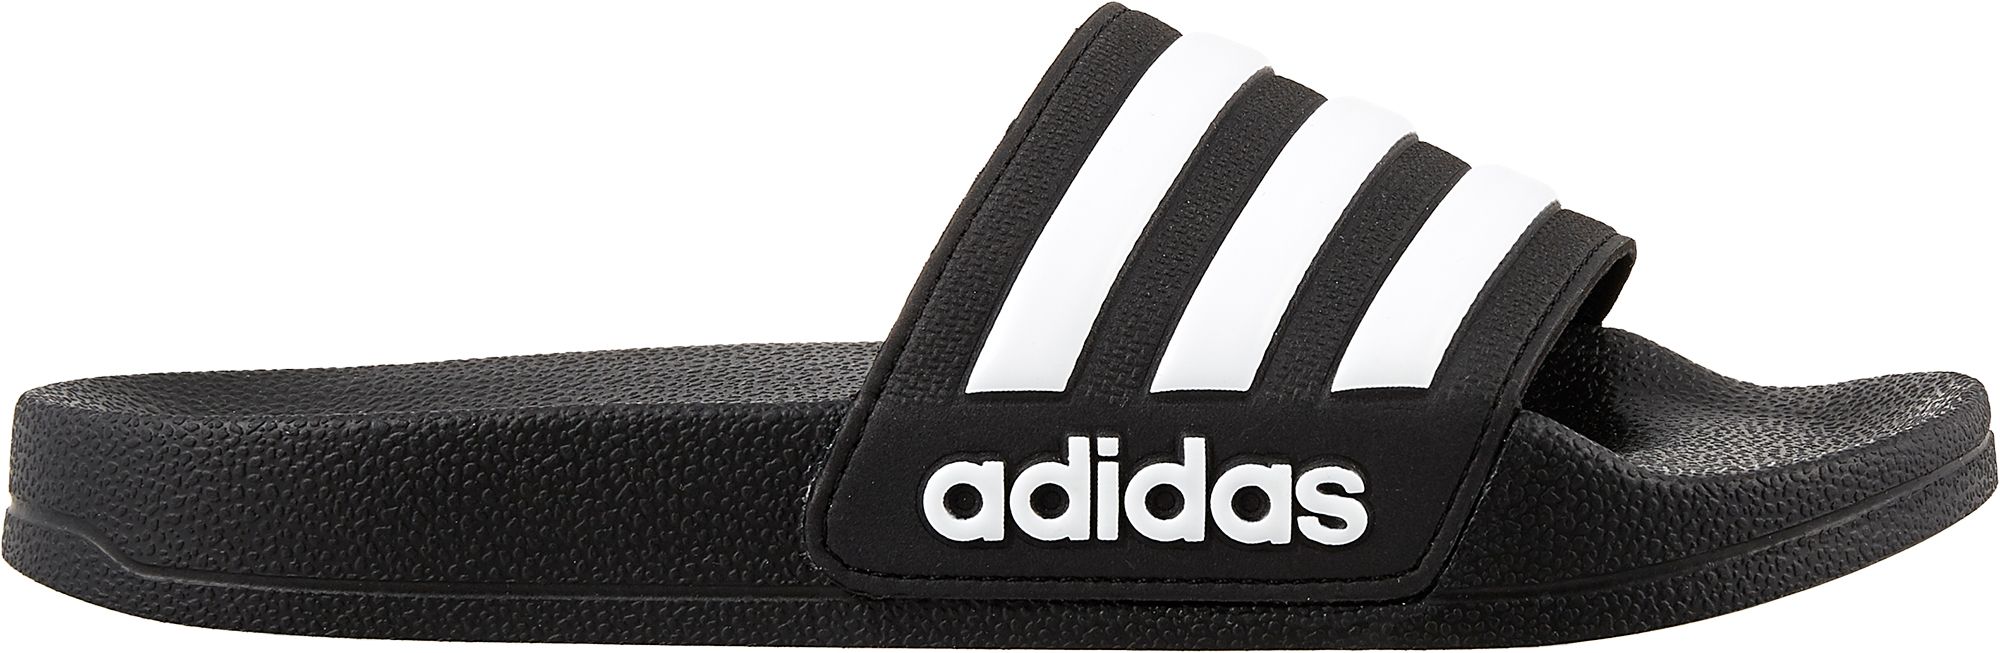 adidas sandals red and black